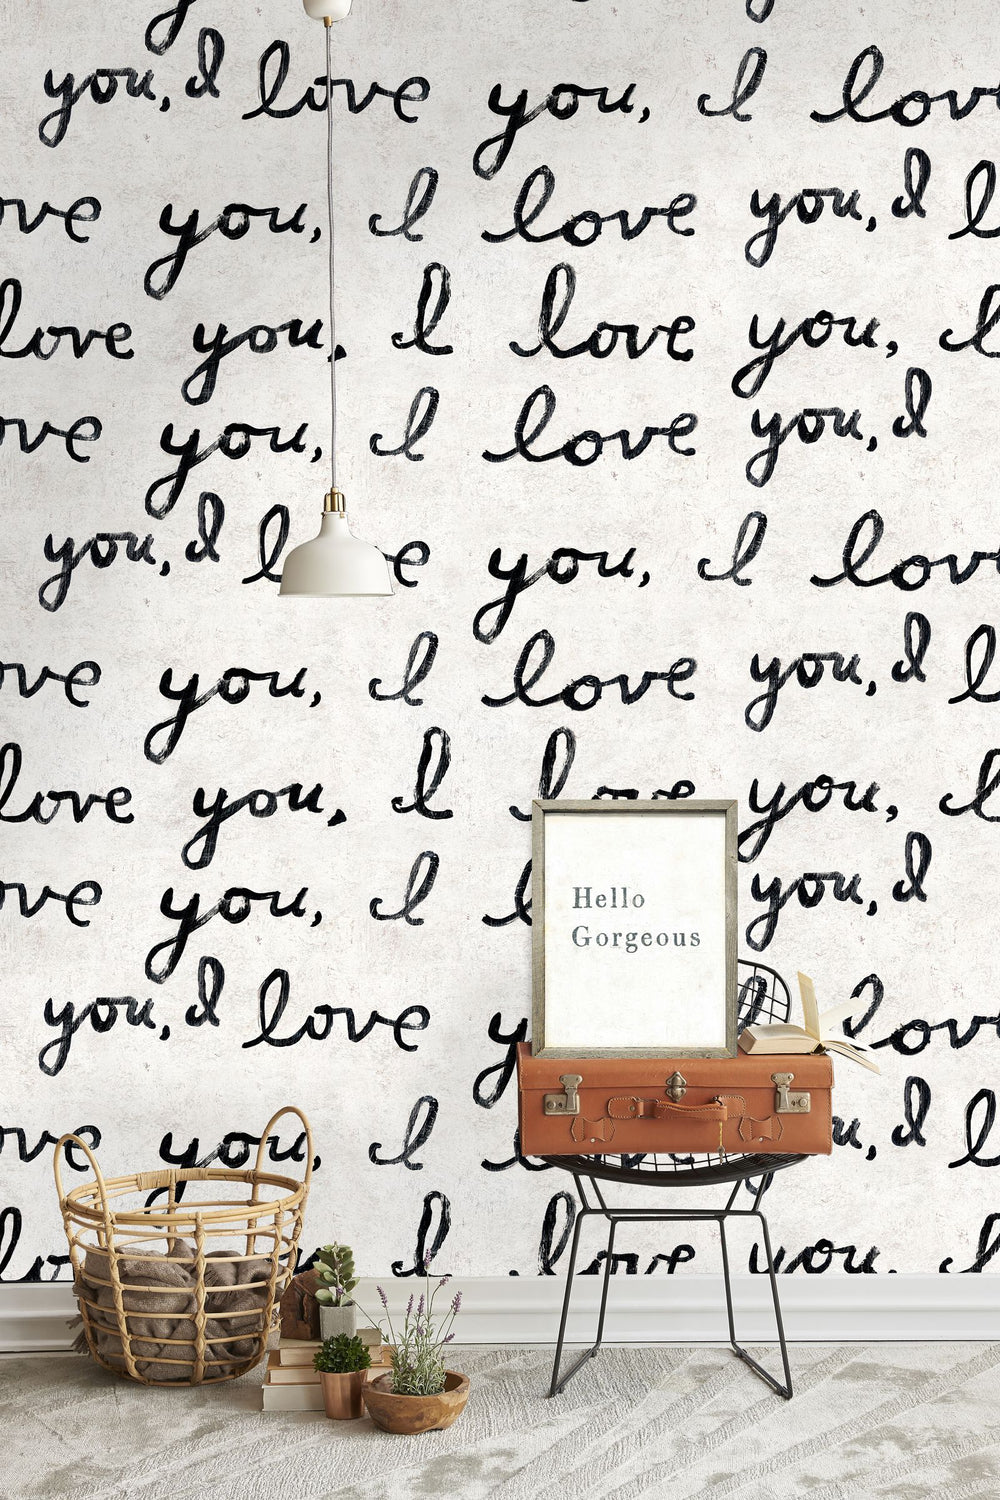 mind-the-gap-i-love-you-wallpaper-sugarboo-collection-black-and-white-handwritten-room